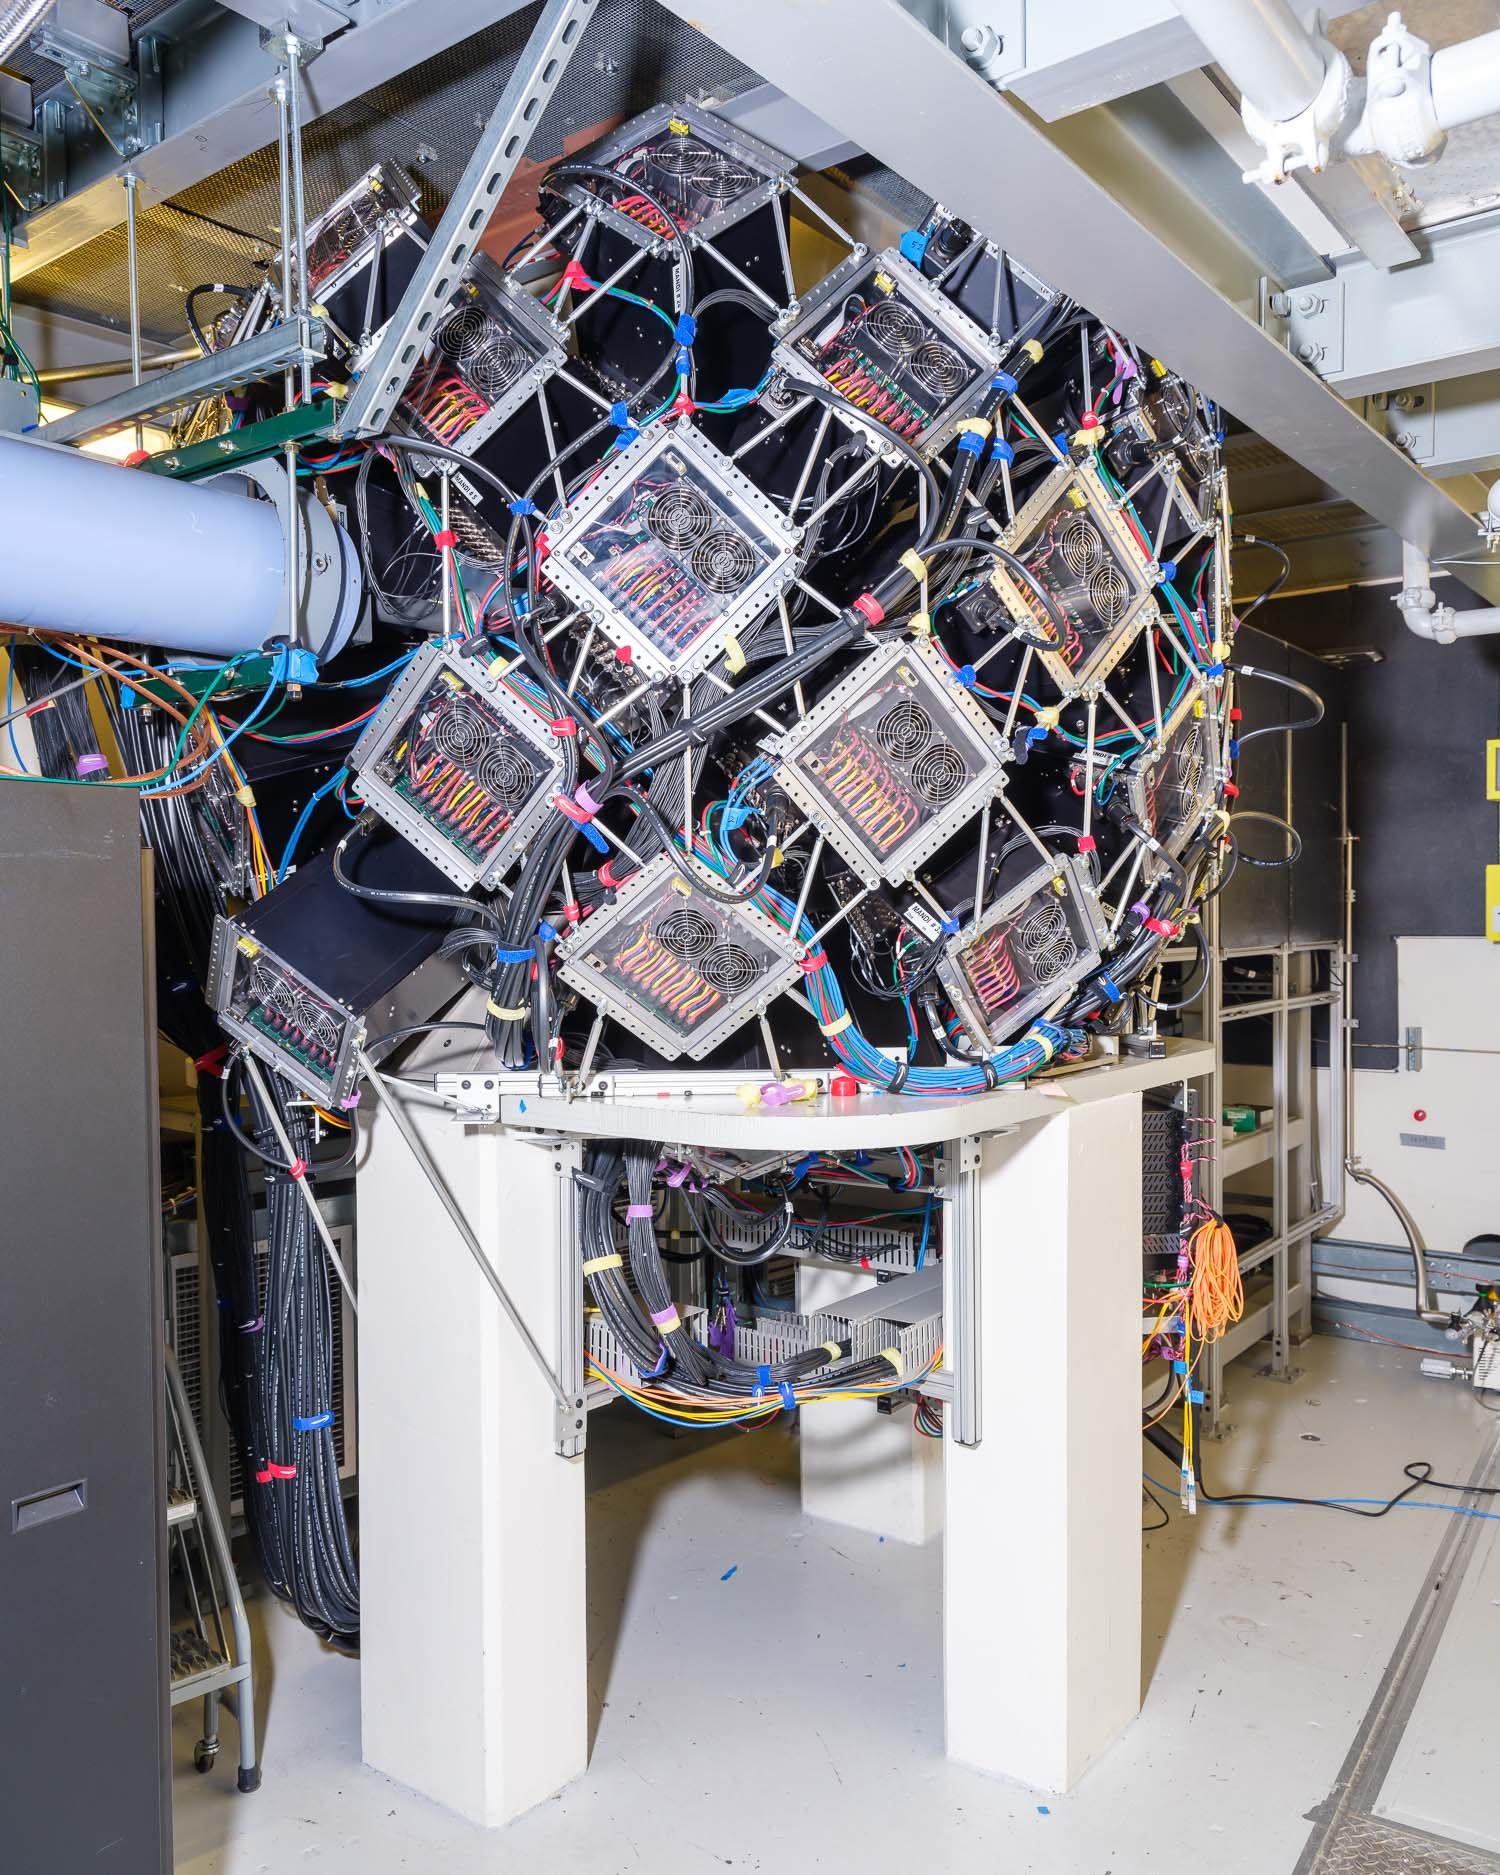  The macromolecular neutron diffractometer, called MaNDi, at the SNS facility at Oak Ridge National Laboratory is designed to study biological materials such as enzymes, protein drug complexes, and membrane proteins. The samples are lowered into the 